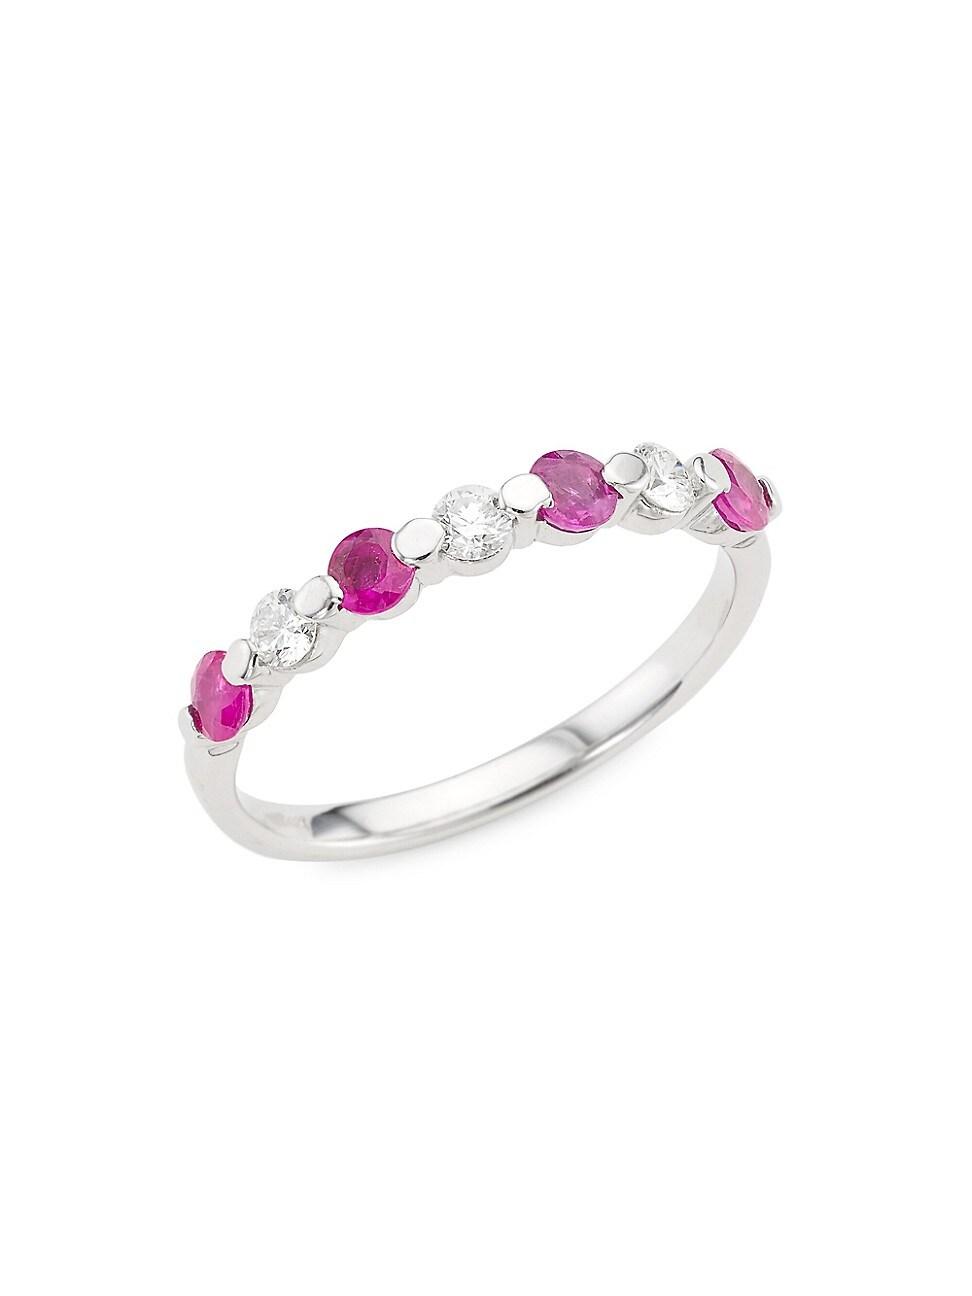 Saks Fifth Avenue 14k White Gold, Ruby & 0.22 Tcw Diamond Ring in Pink ...